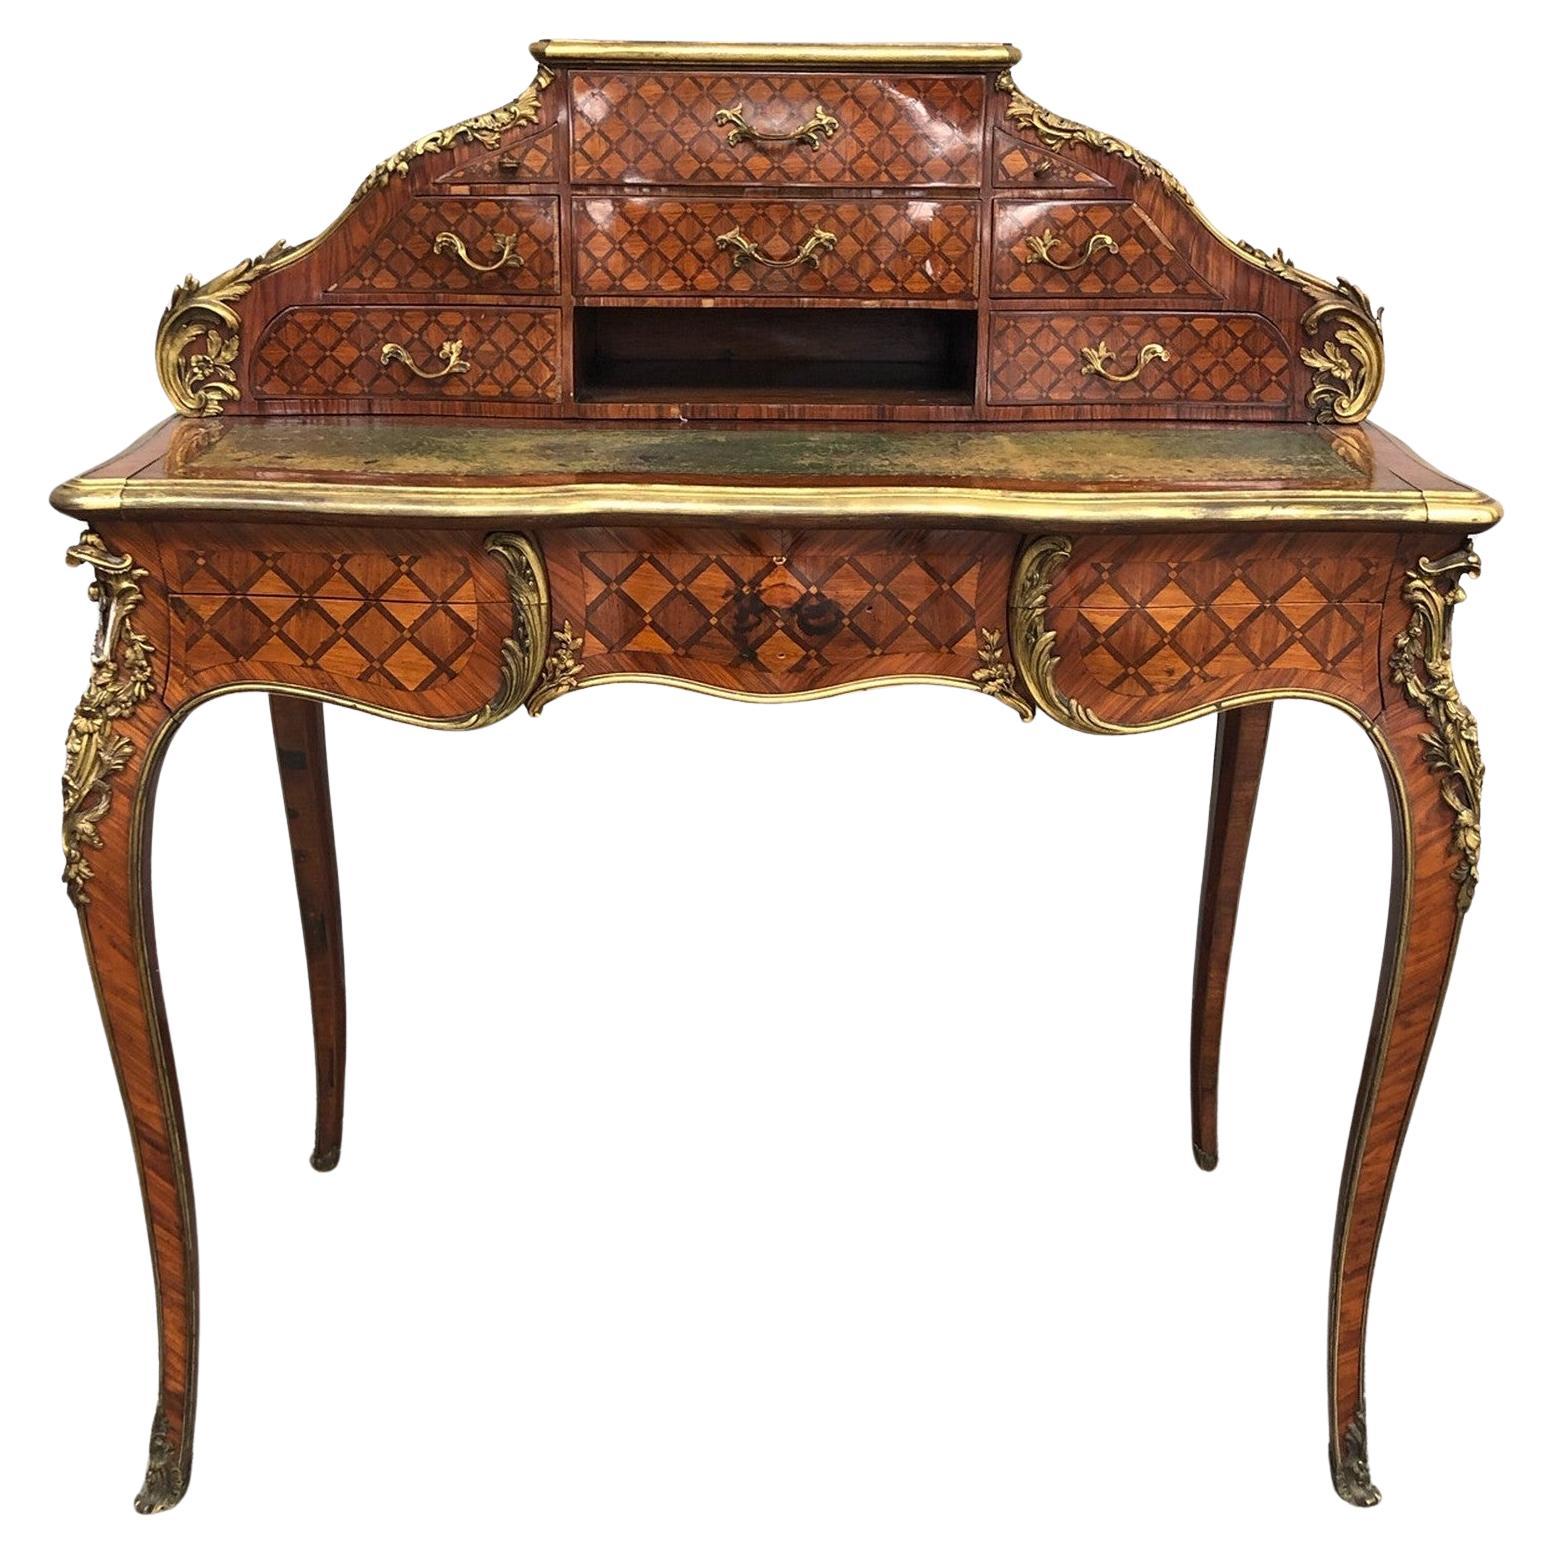 Louis XV Style Marquetry Desk, 19th Century